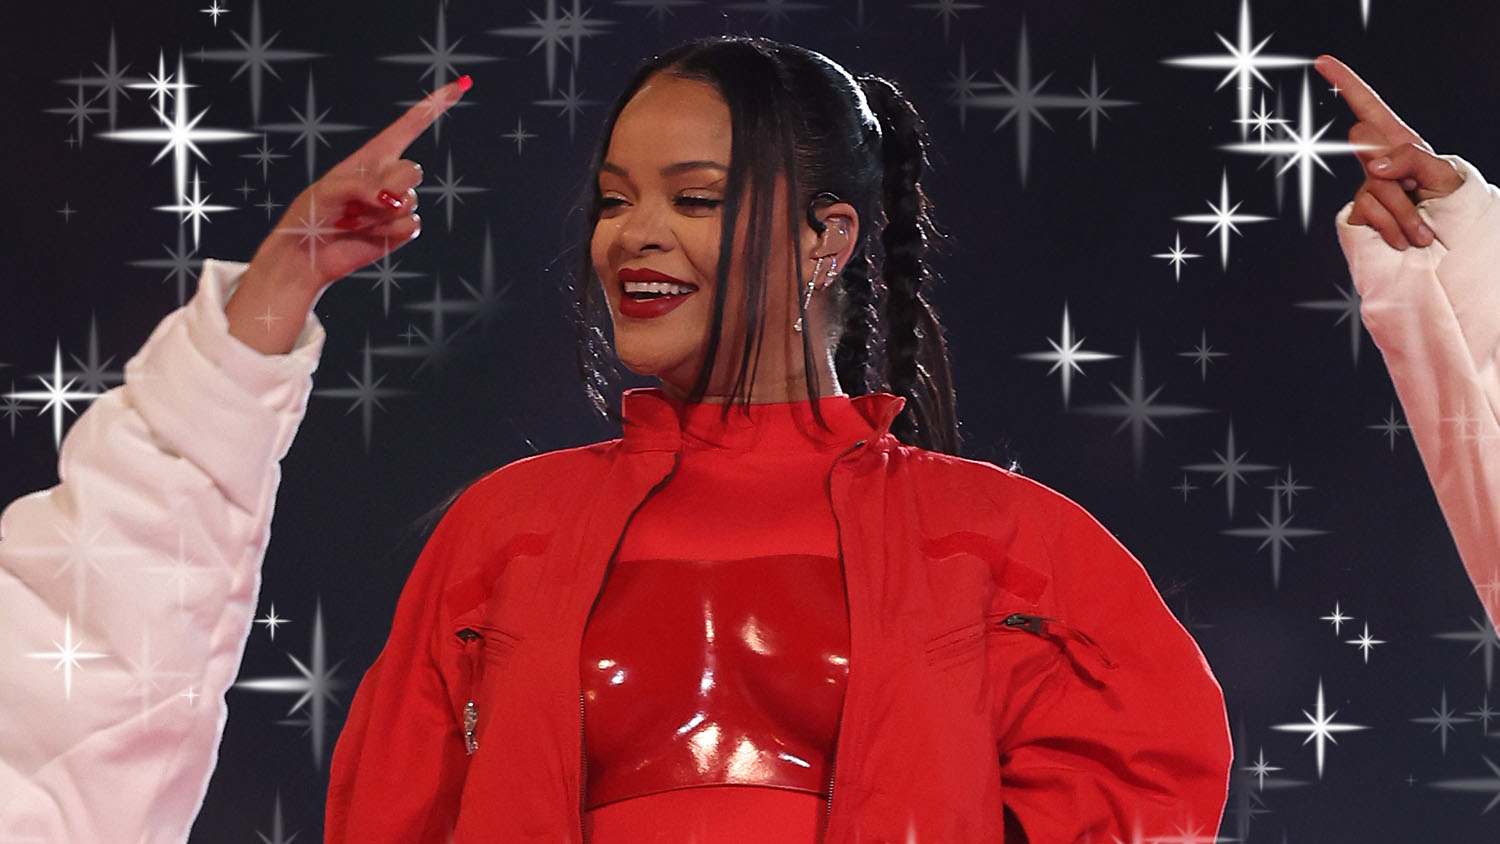 Rihanna's open-back leggings are part of 'thirst-fashion' trend